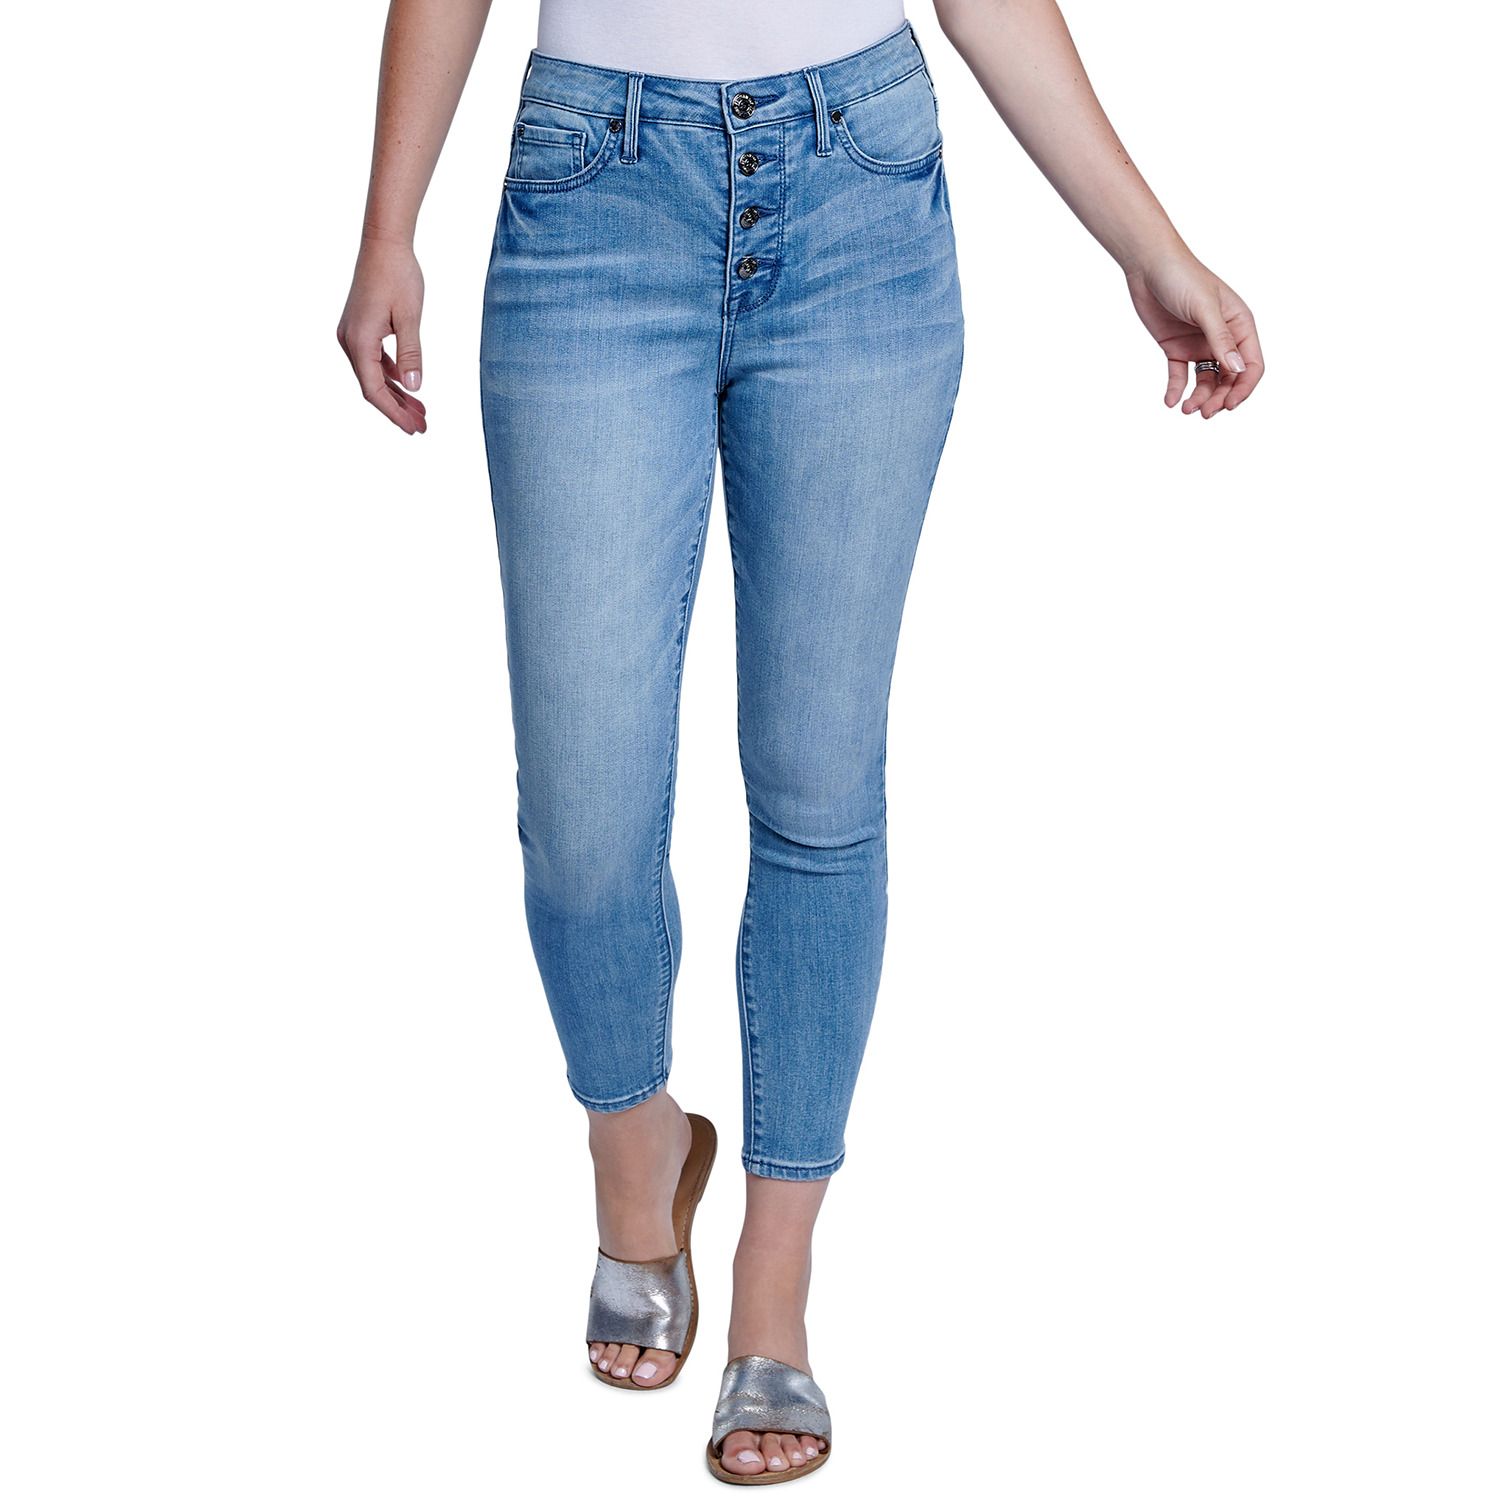 button fly skinny jeans womens